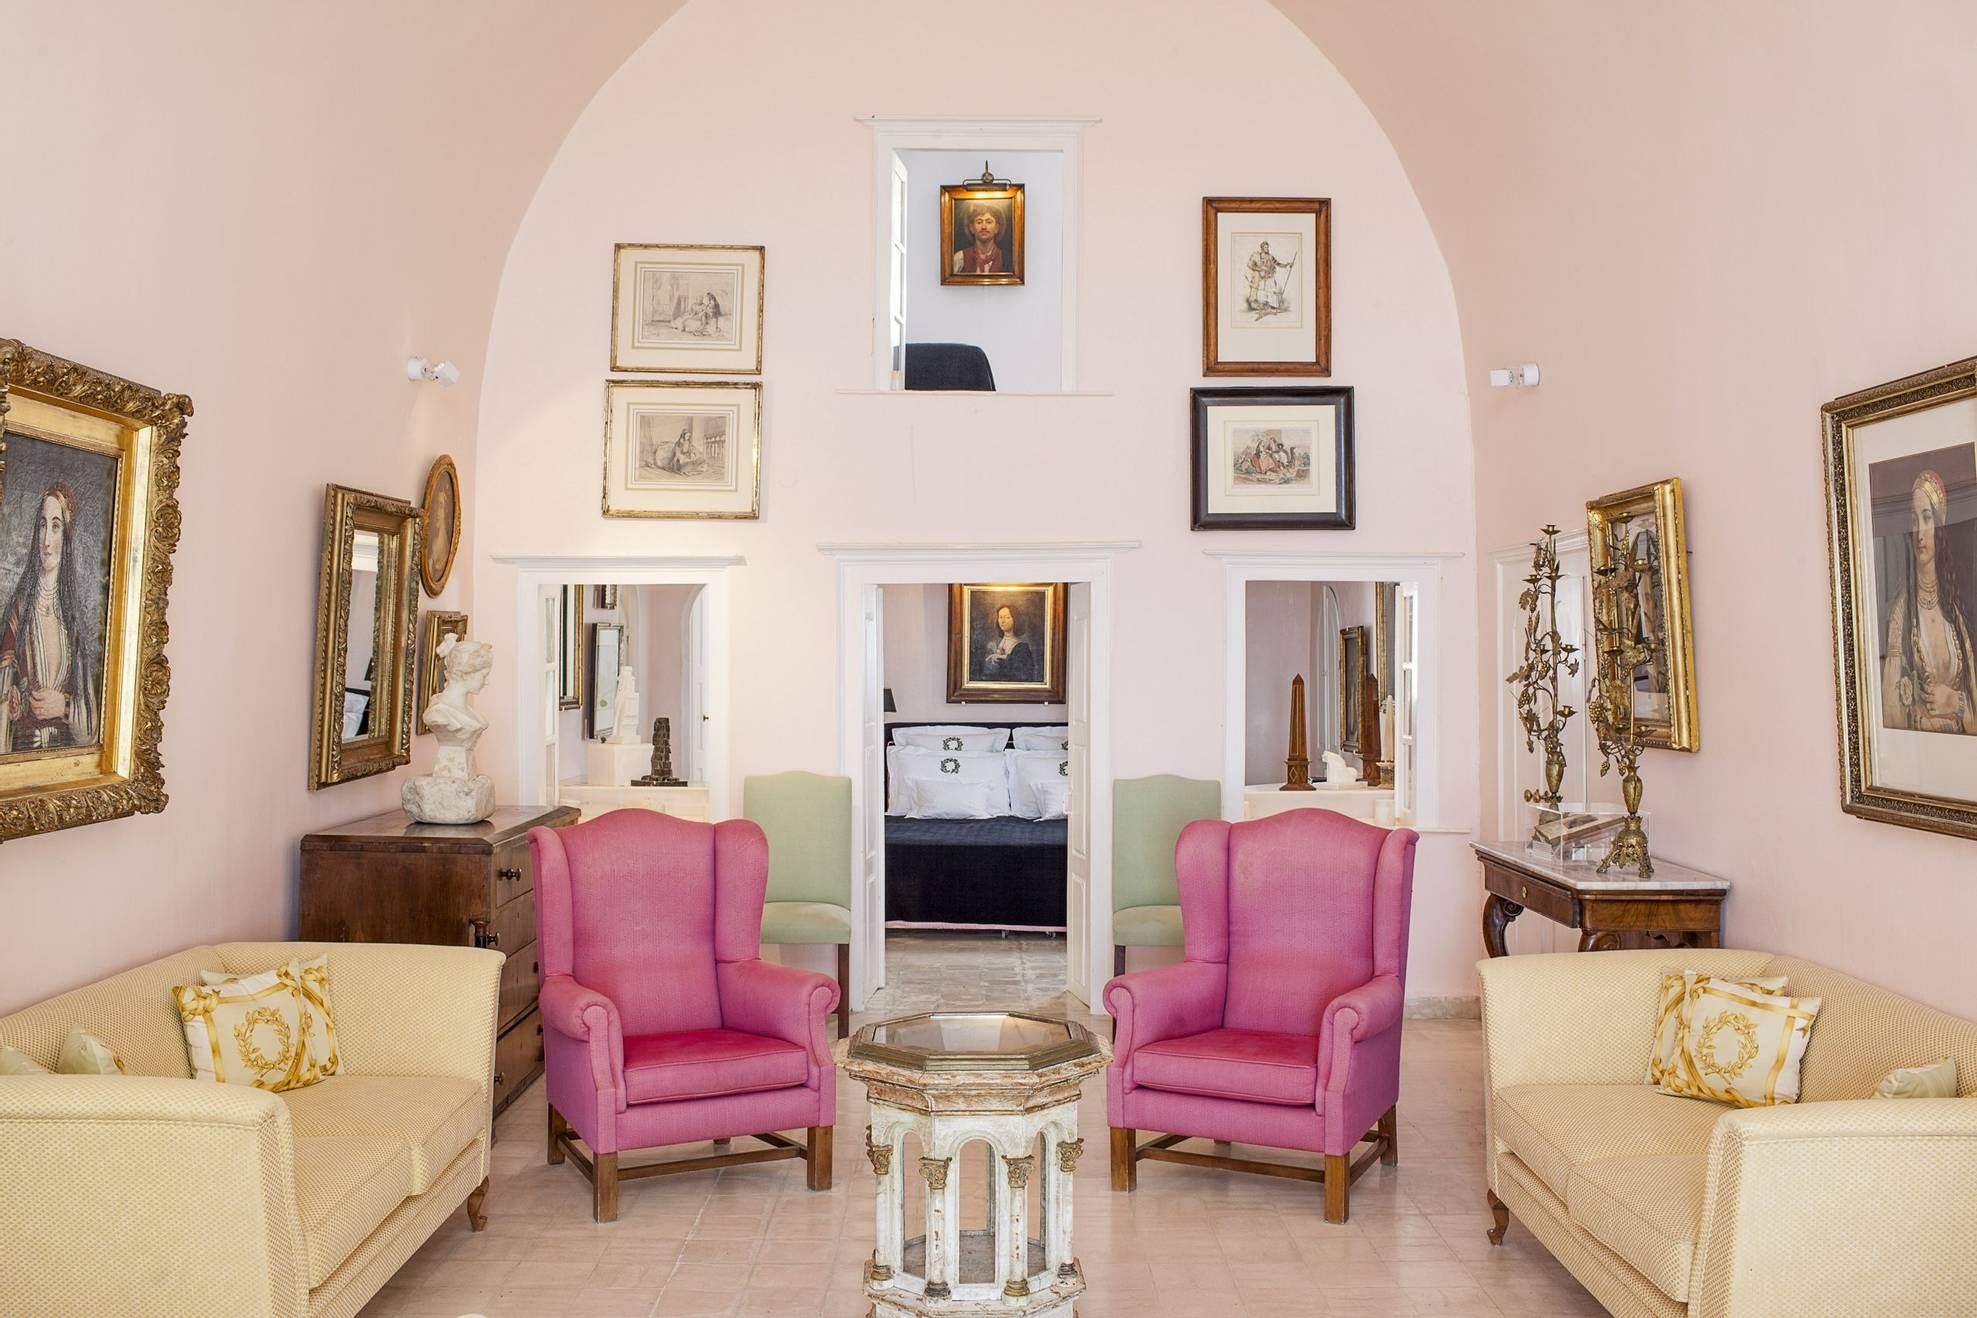 The Tsitouras Collection House of Portraits